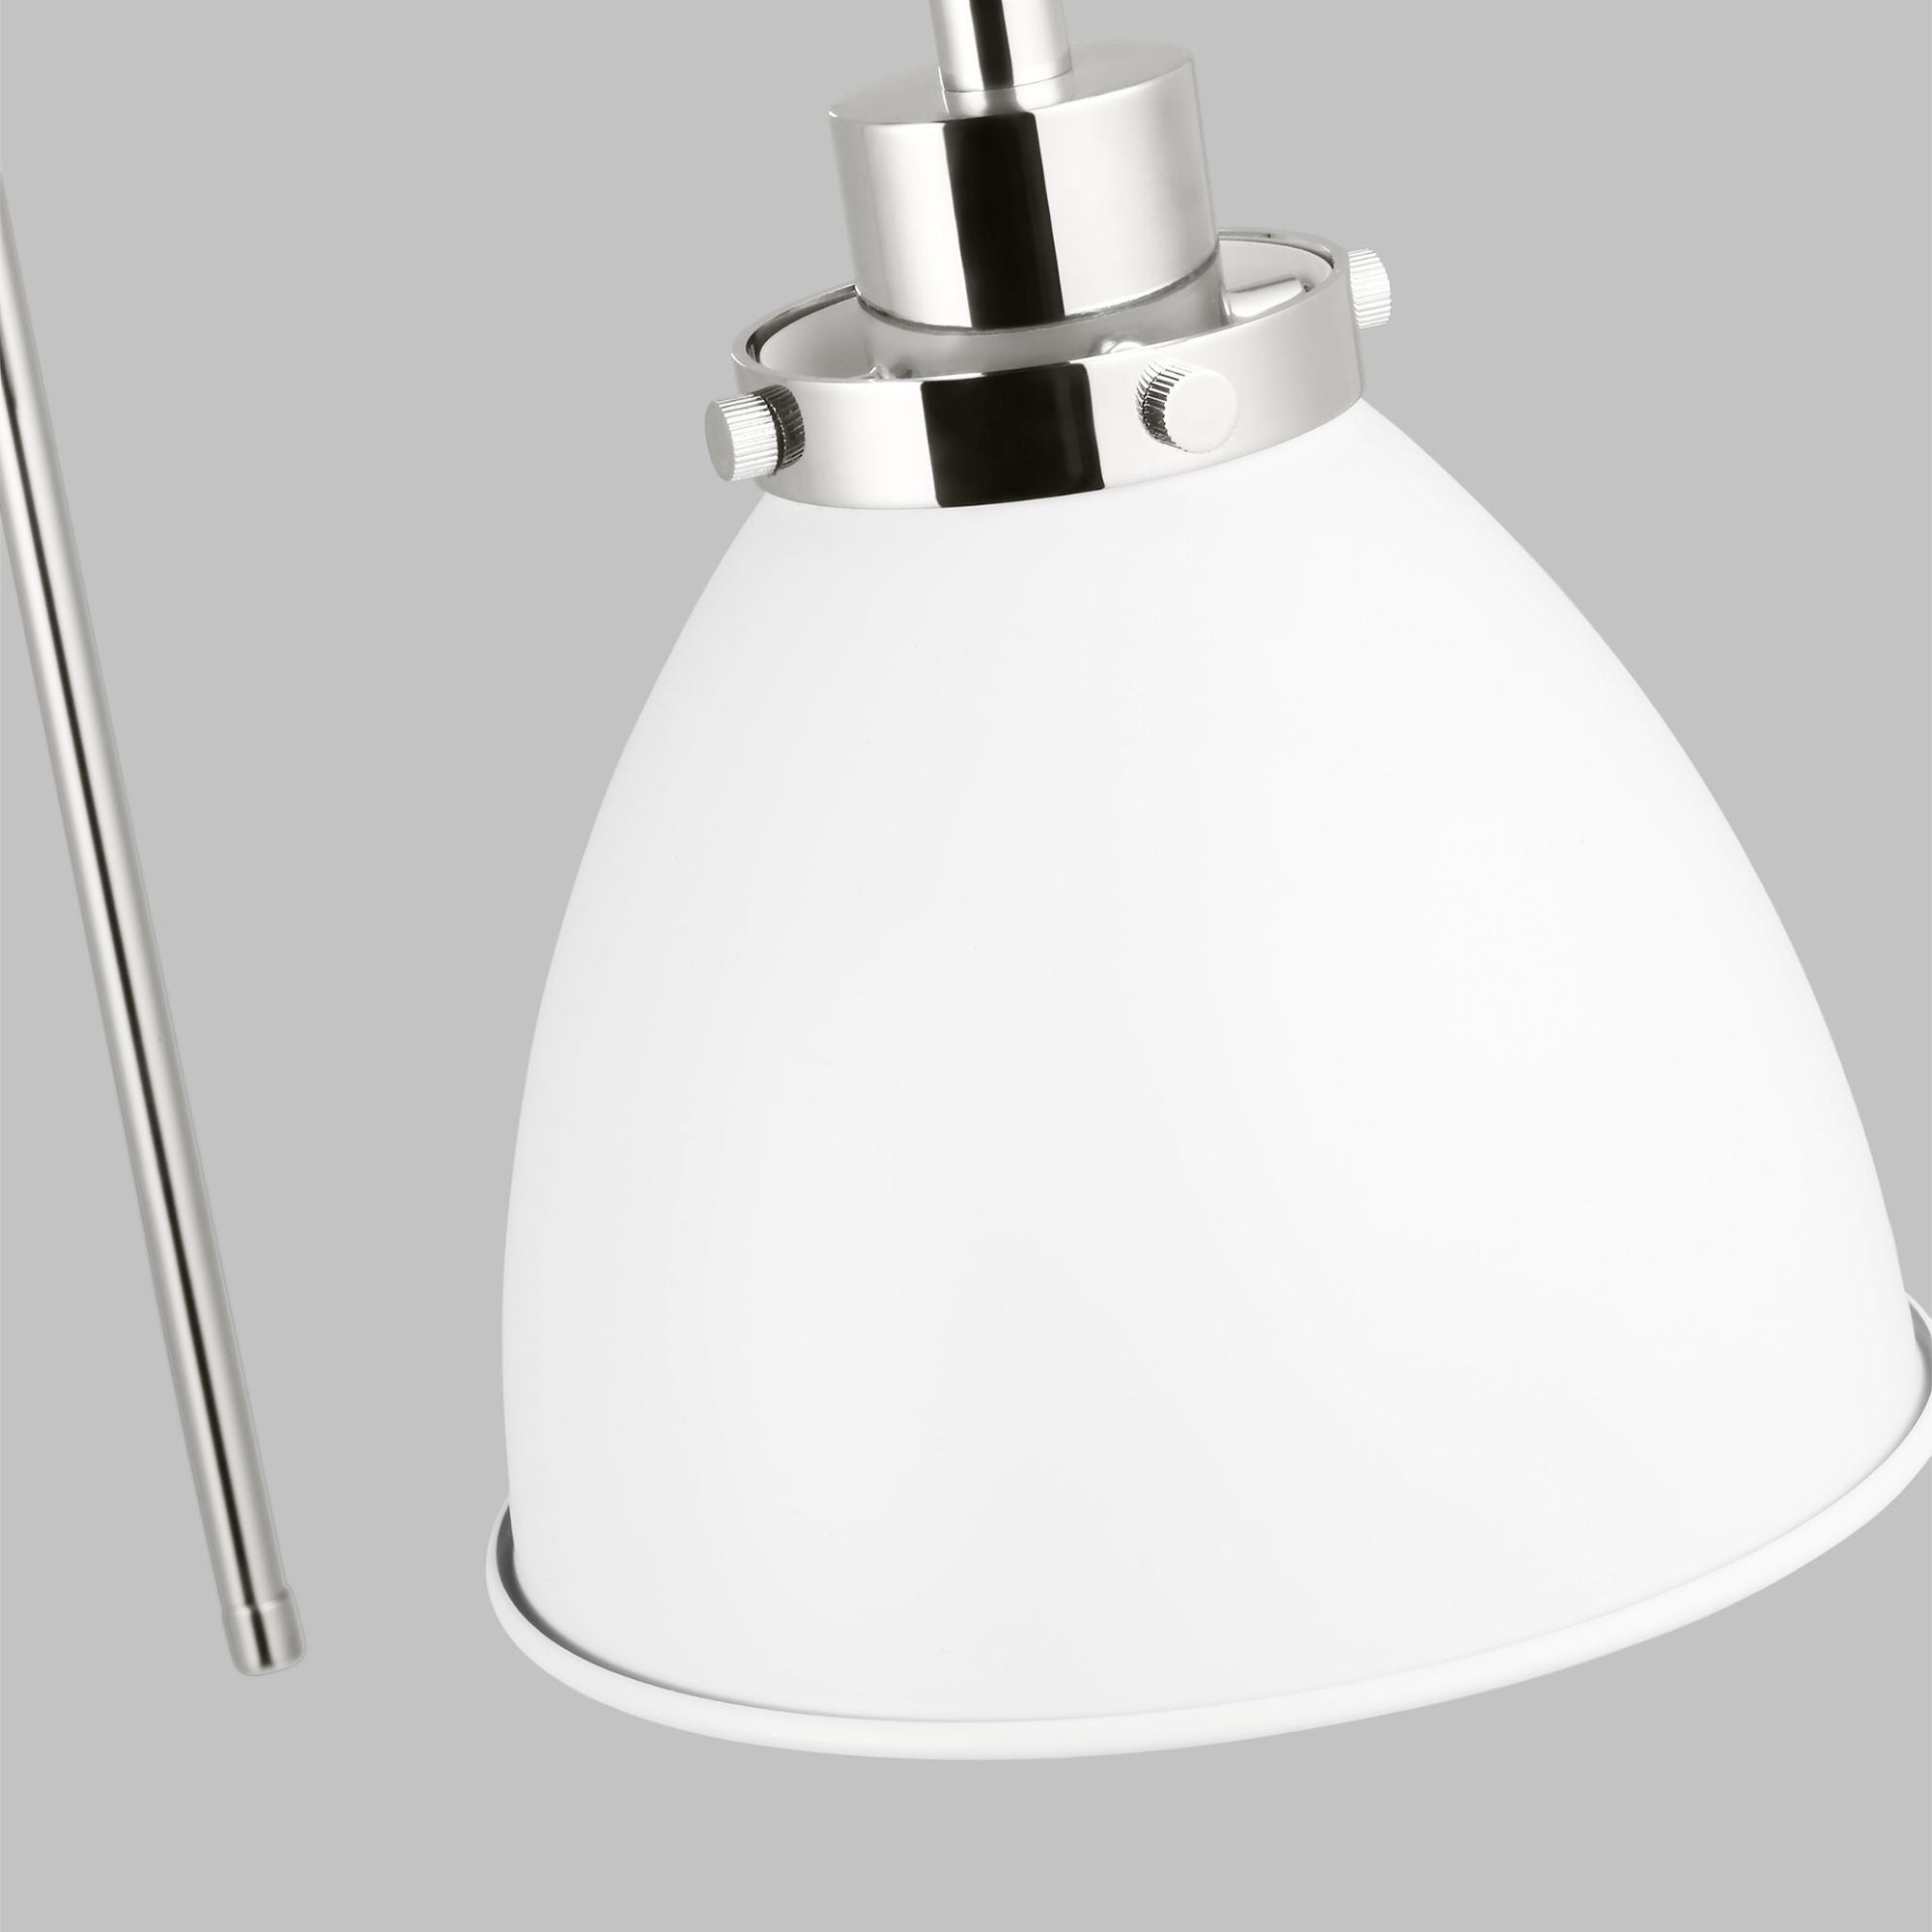 Chapman & Myers Wellfleet Double Arm Dome Task Sconce in Matte White and Polished Nickel